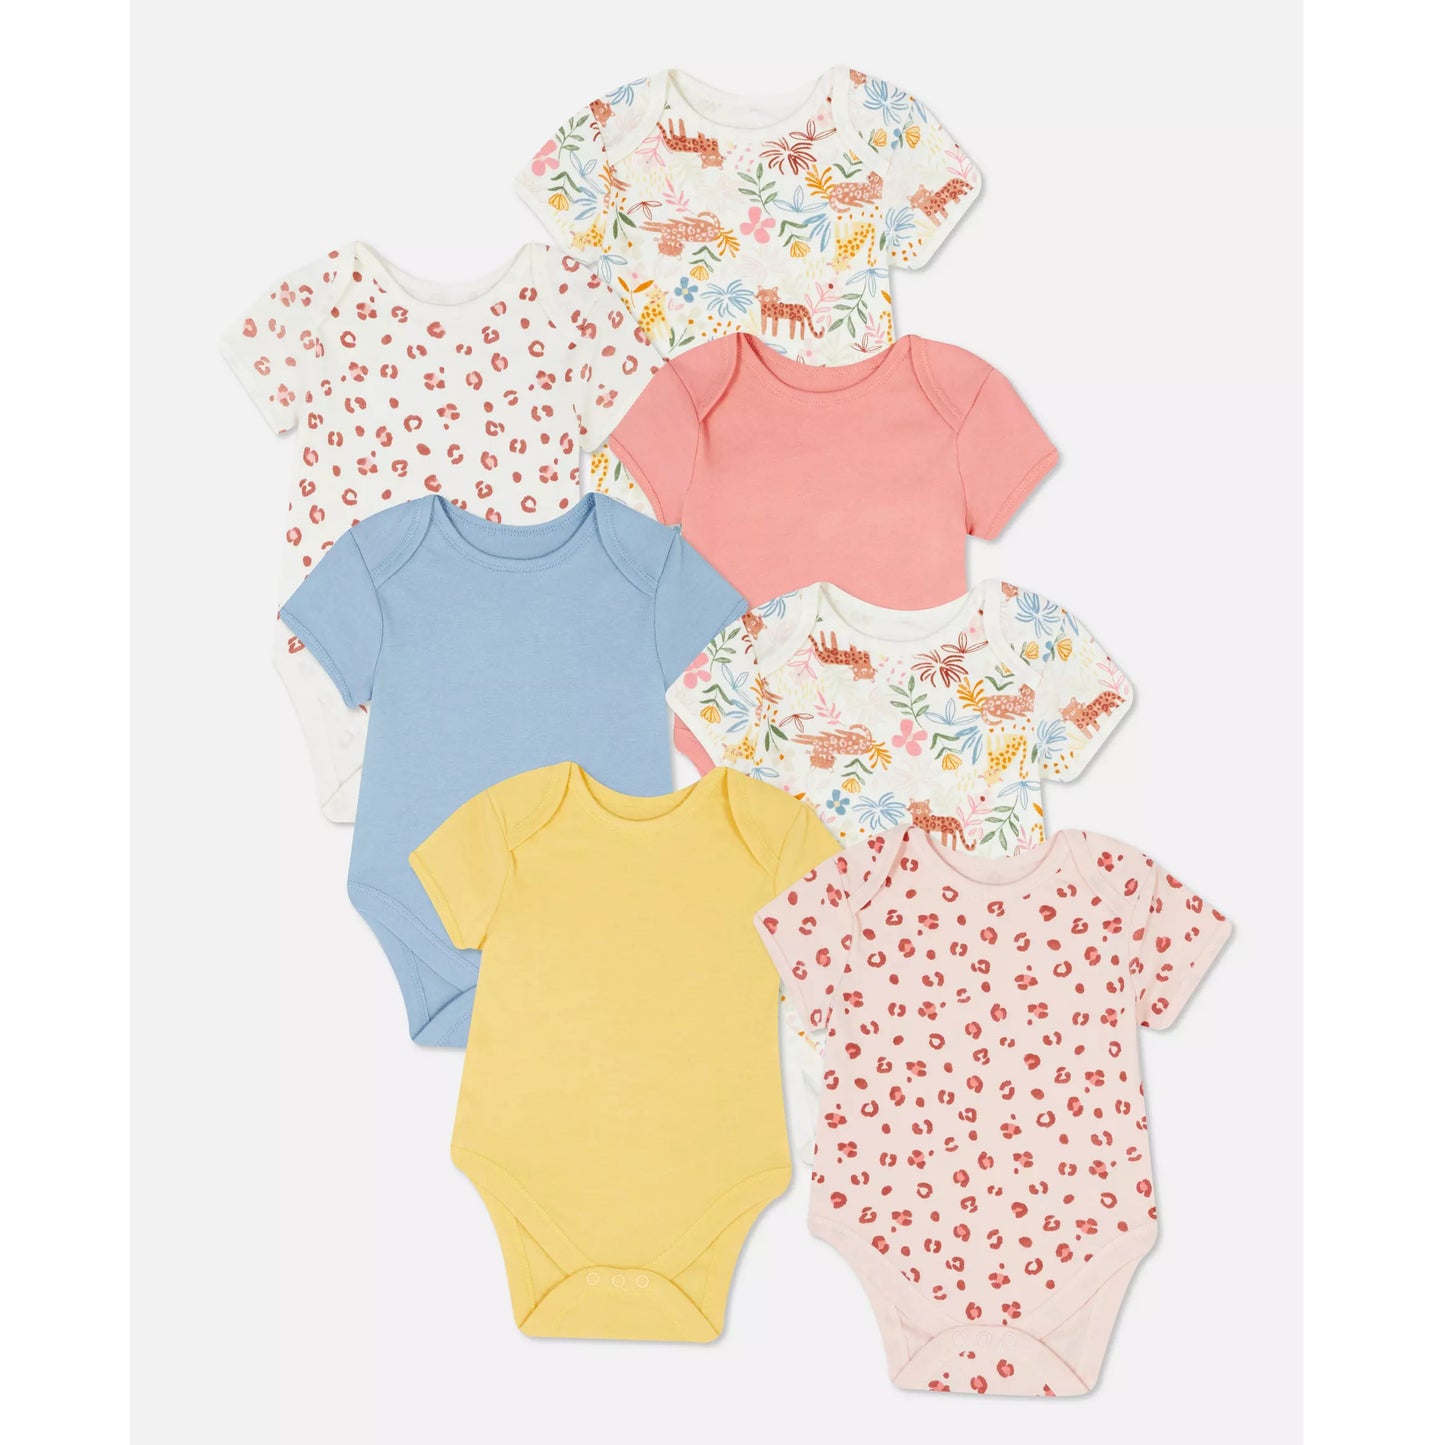 Tropical mood pack of 7 body suits